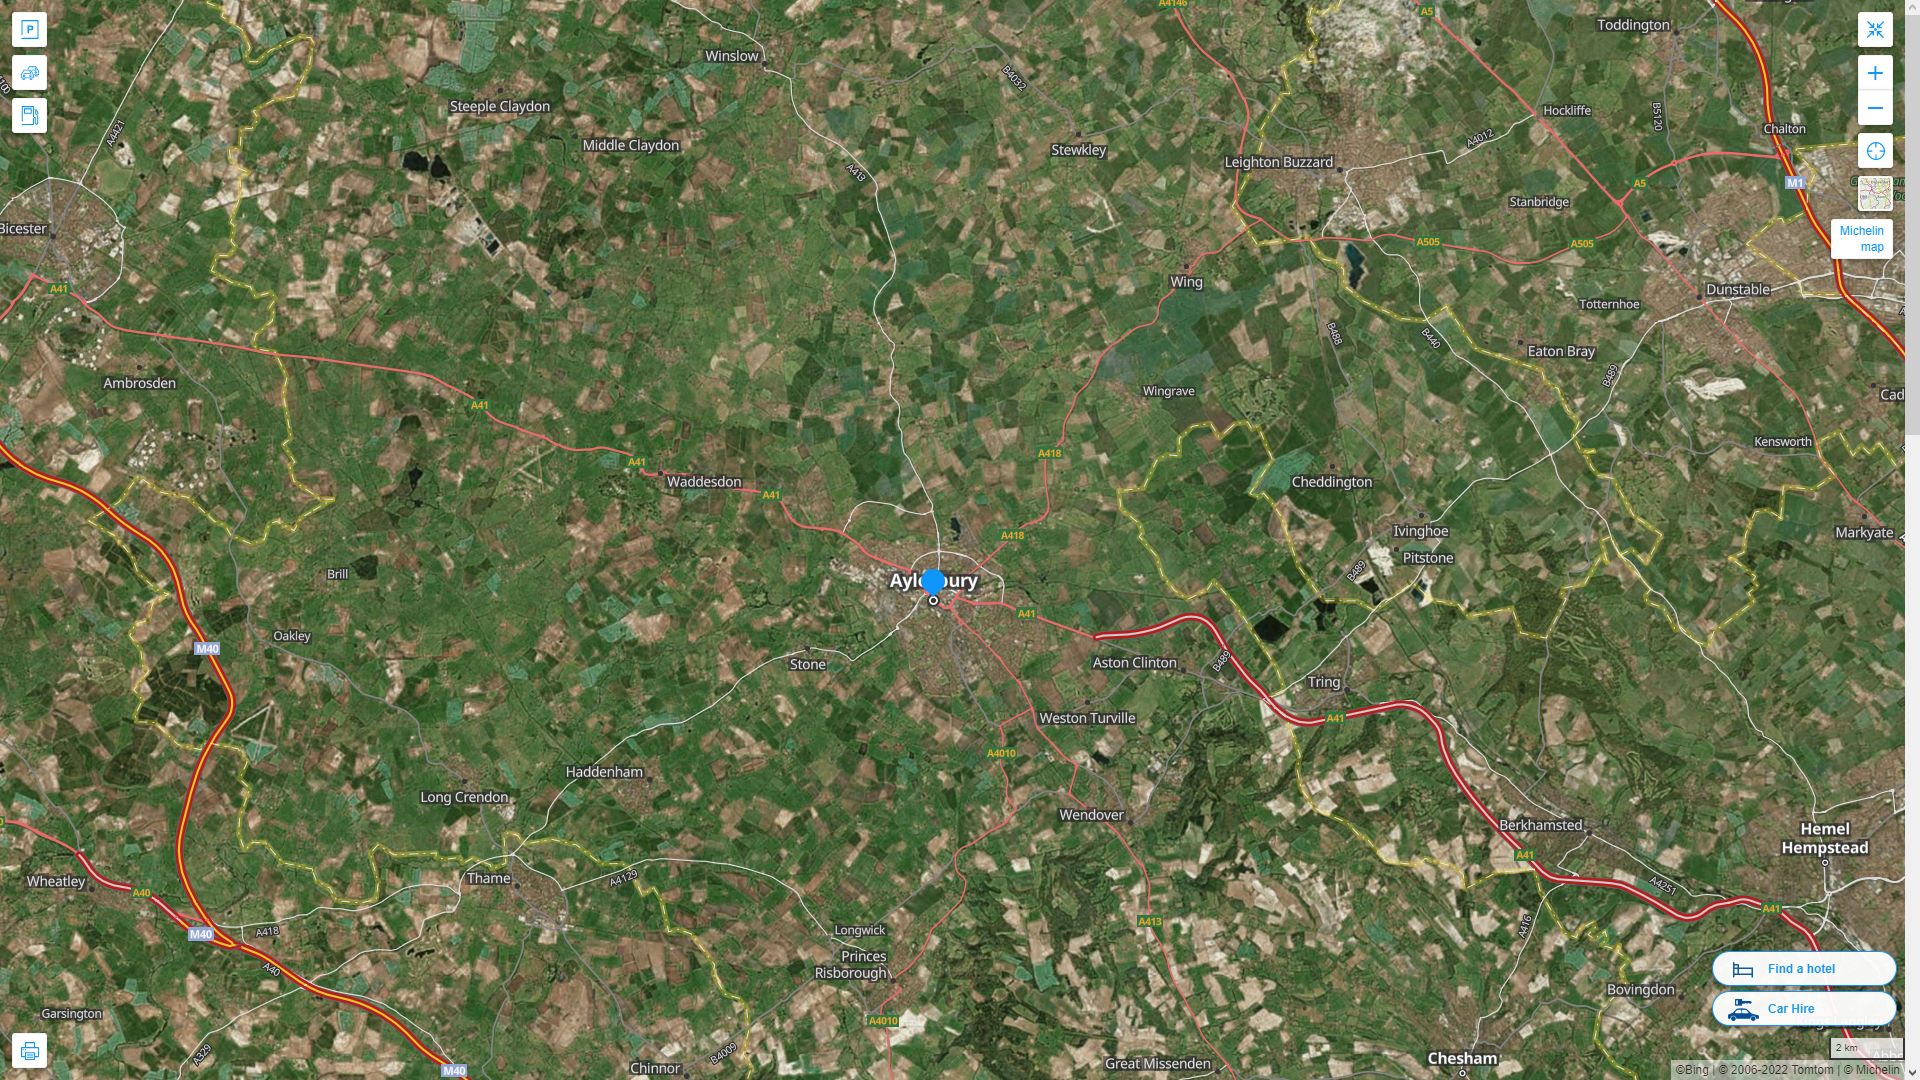 Aylesbury Highway and Road Map with Satellite View